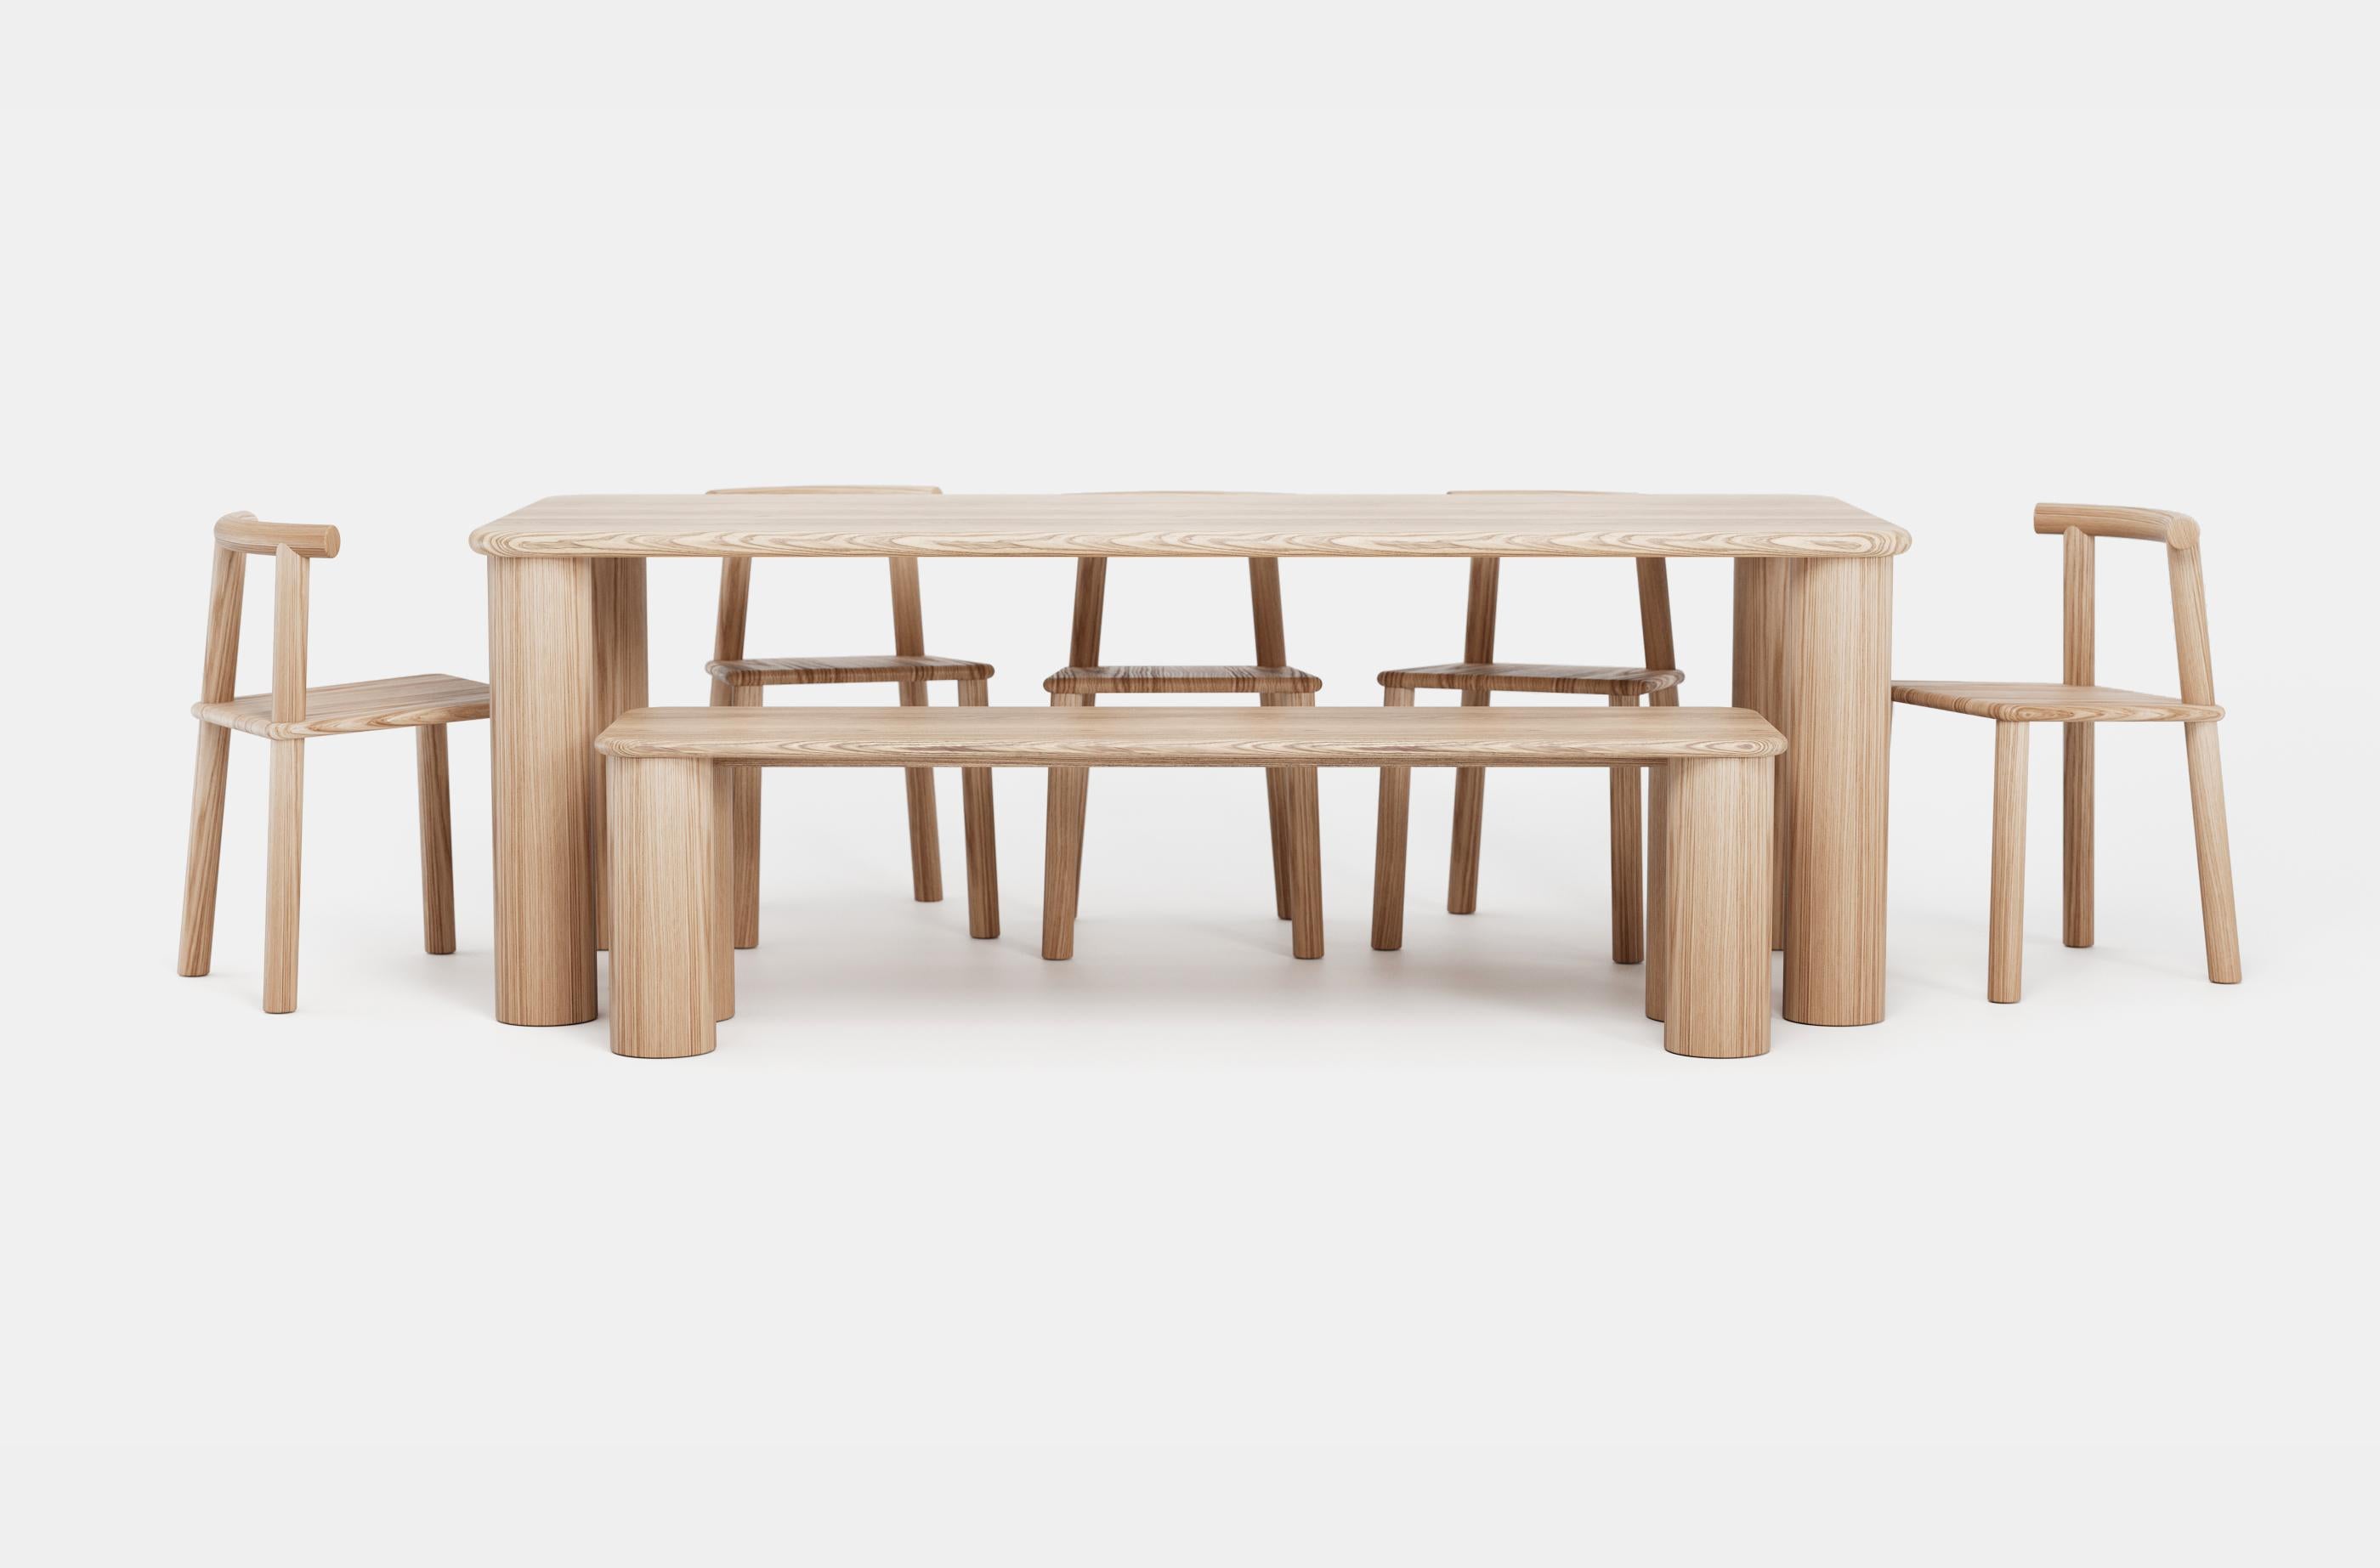 Step into a world of refined elegance and heartfelt connections with the exquisite COMMUNE dining table. Handcrafted from locally sourced red oak, each table is a testament to the natural splendor of Quebec. The sleek, thin tabletop dances in